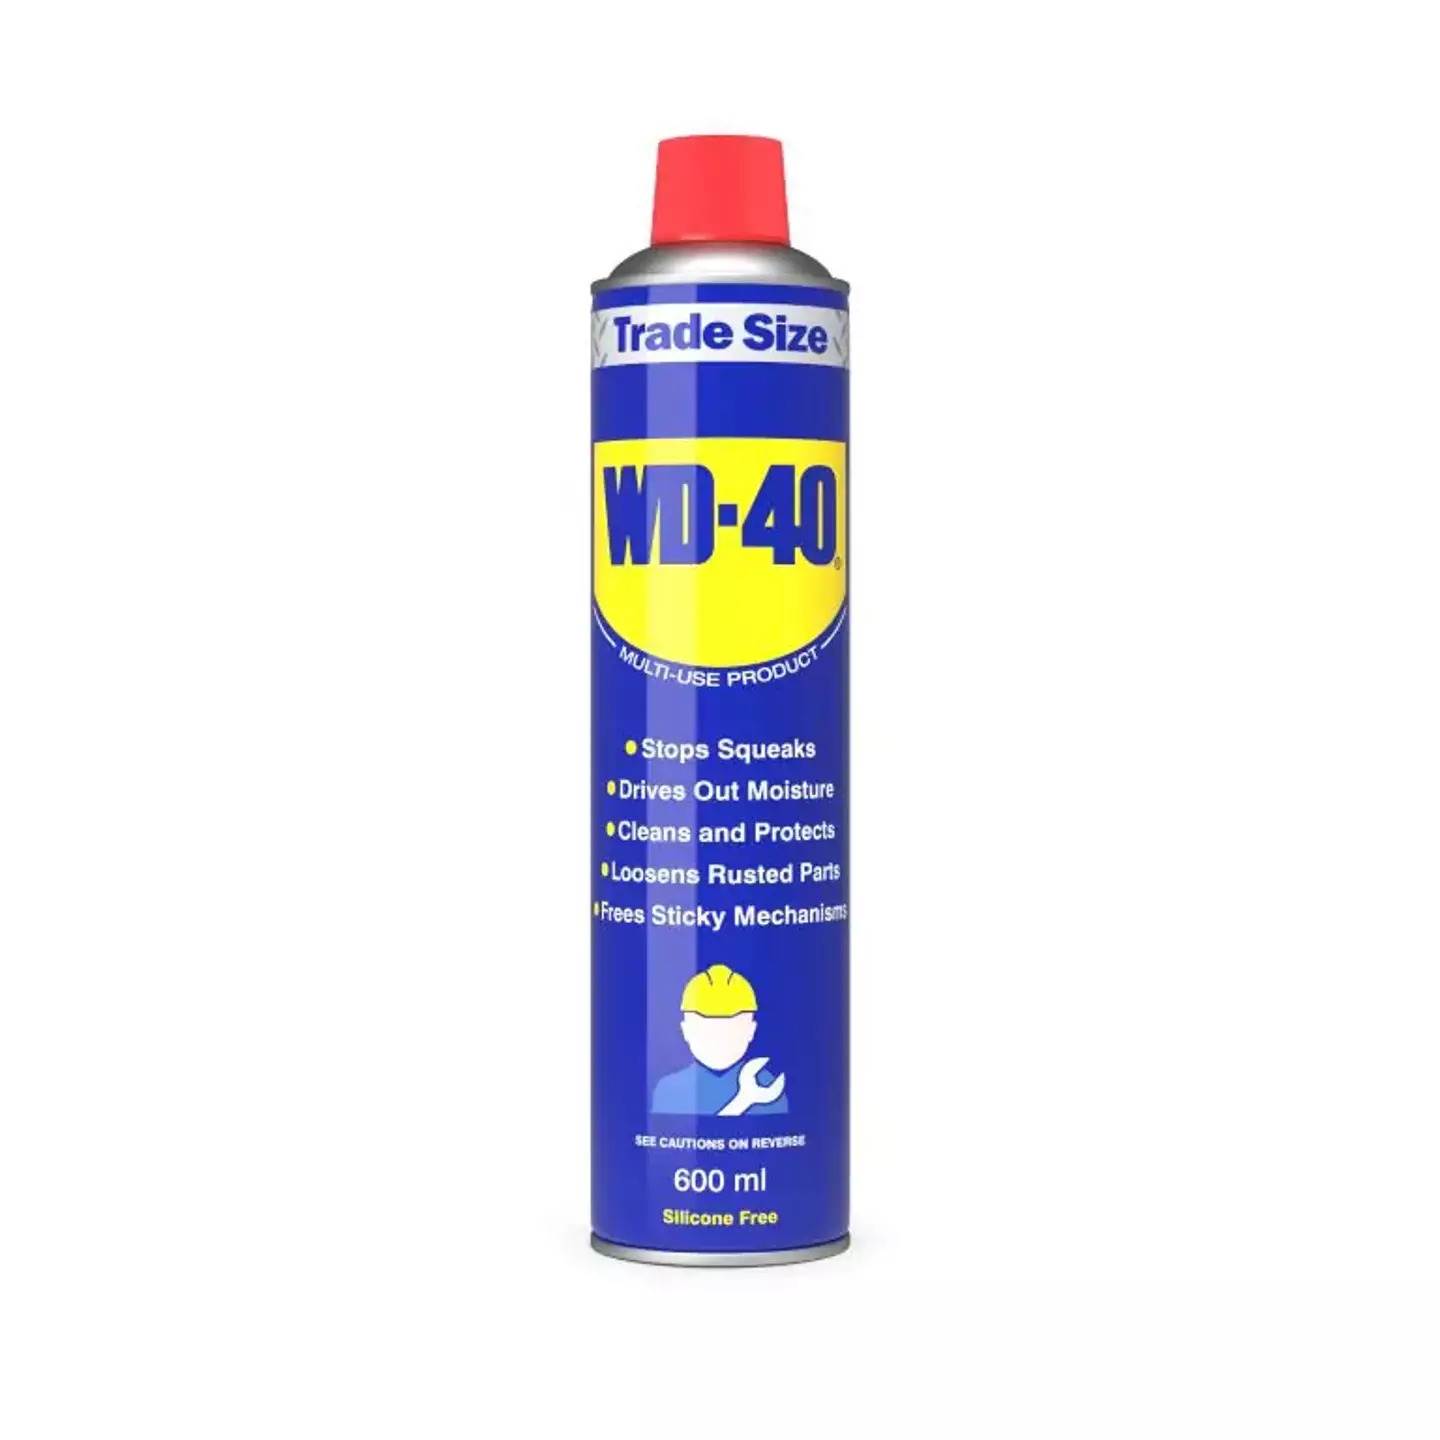 Are you even British if you don't have a can of WD-40 spray lying around in your tool box?